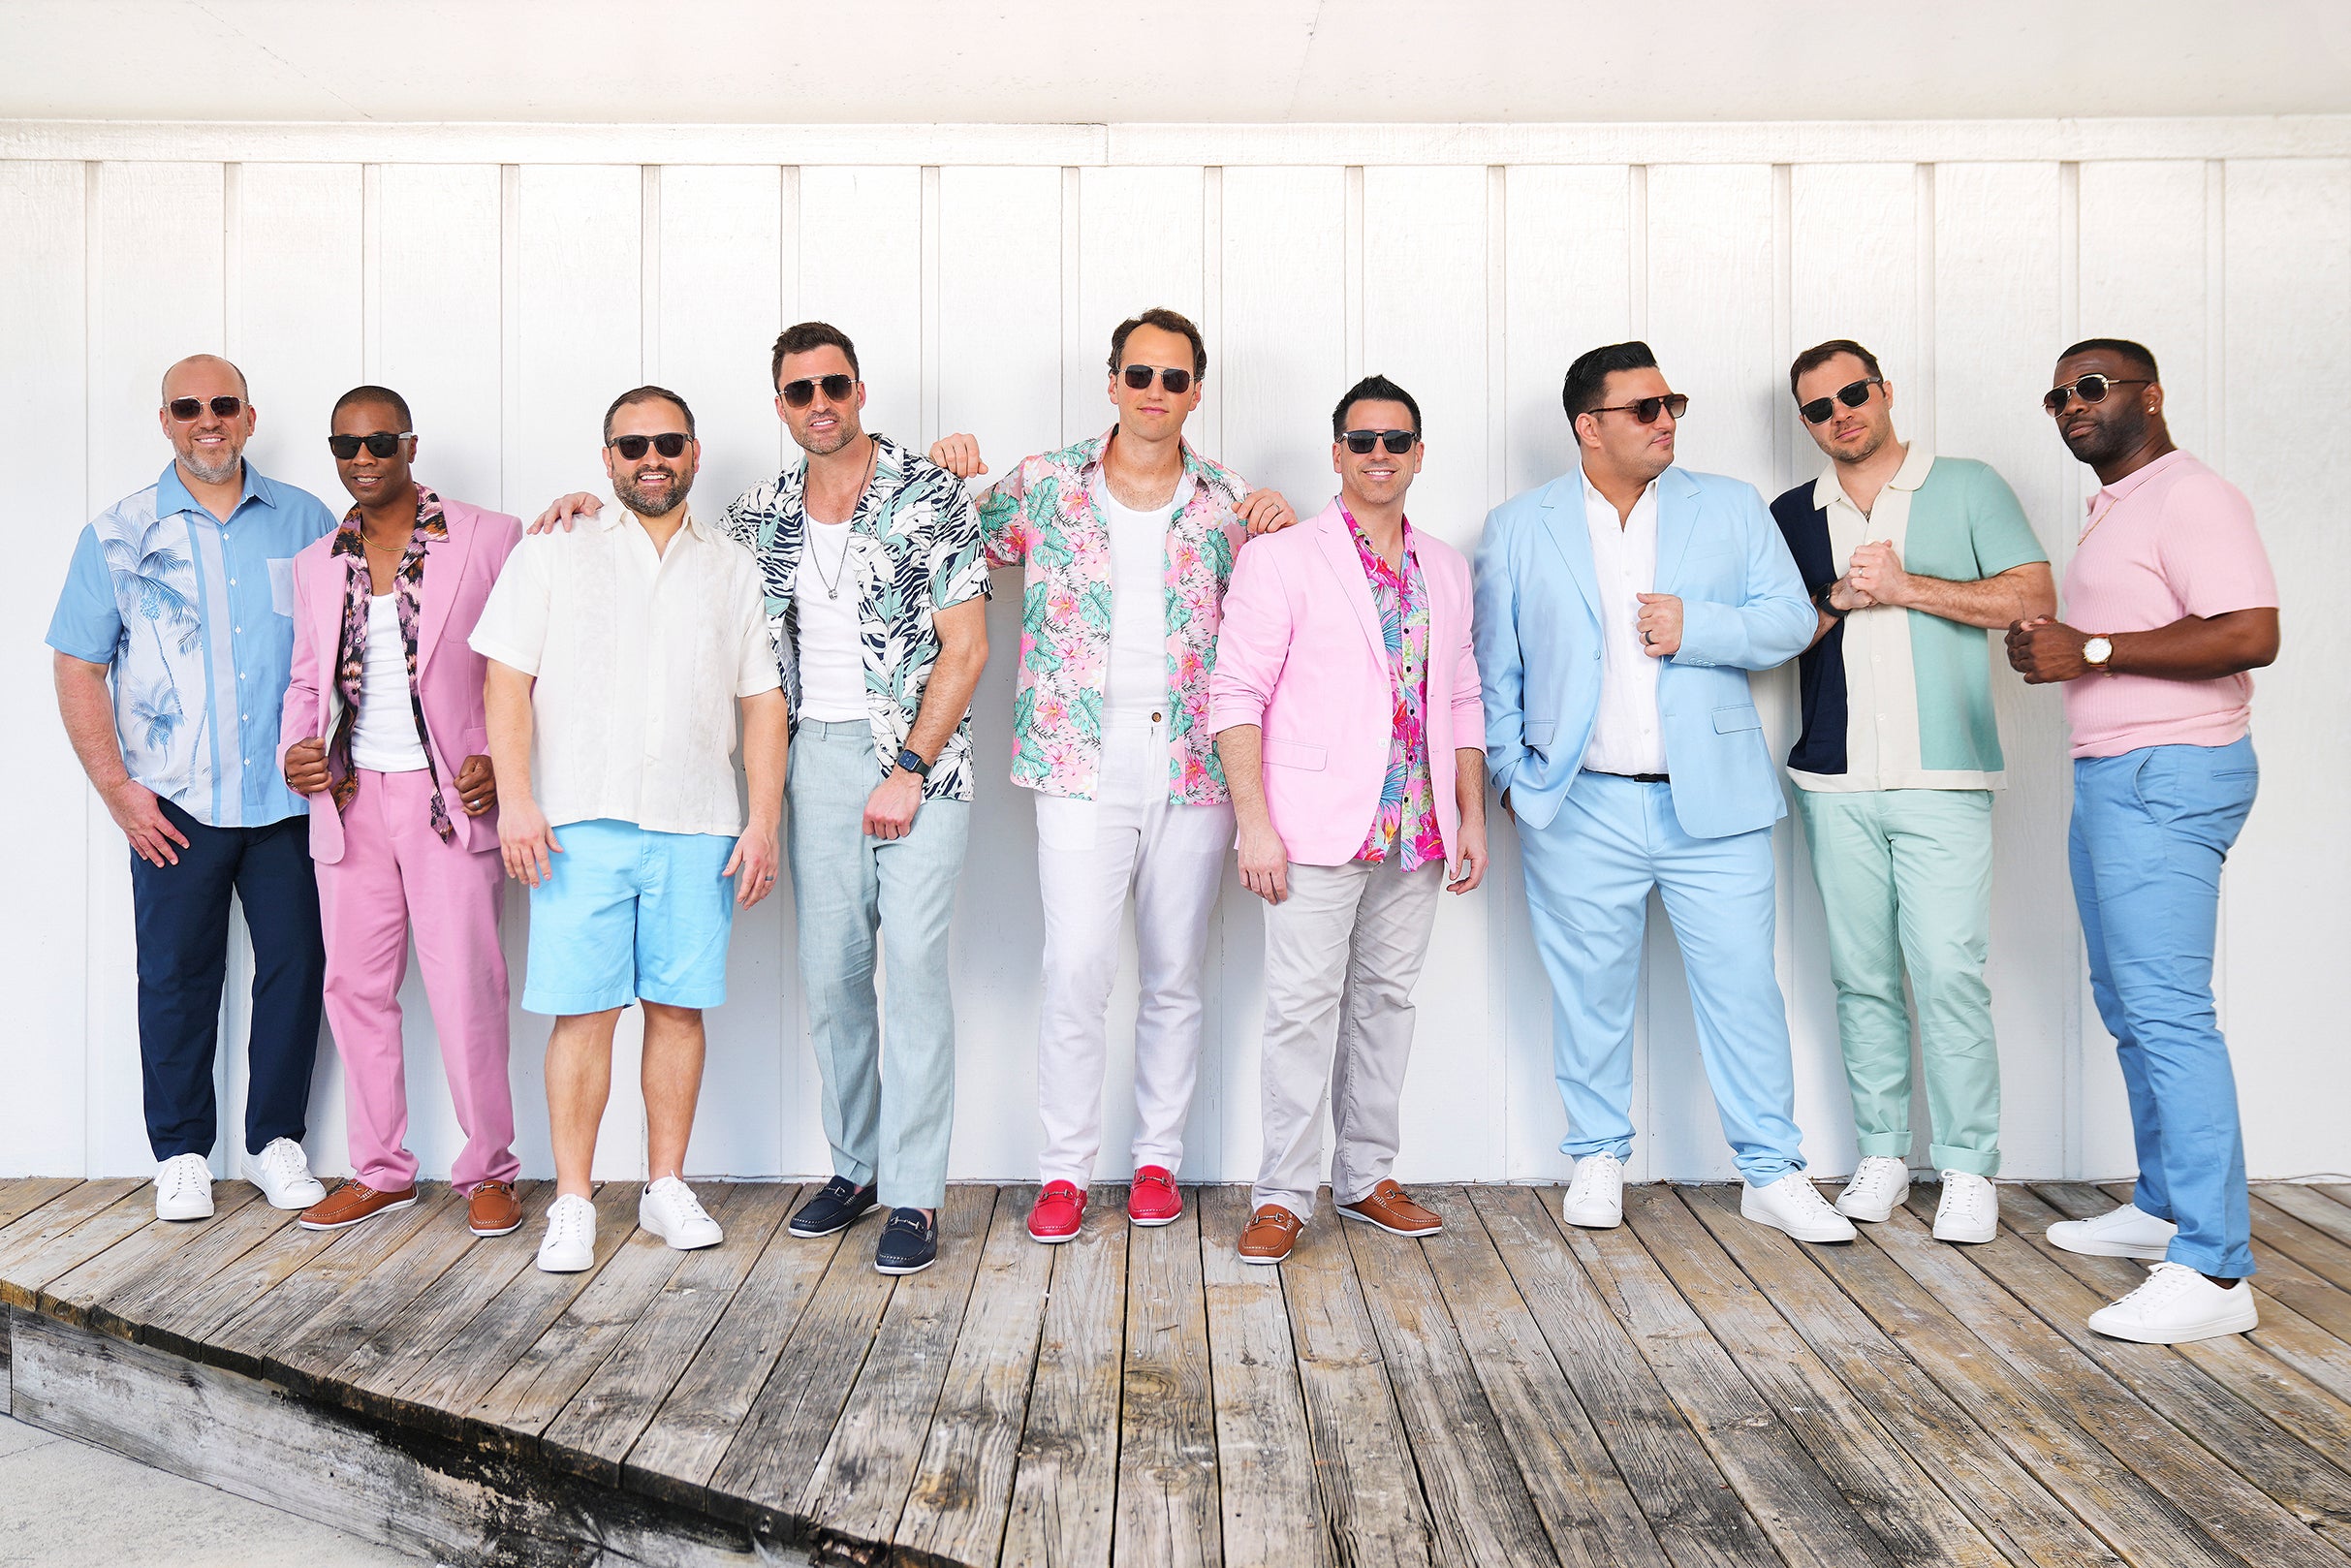 exclusive presale password for Straight No Chaser Summer: The 90's tickets in St. Louis